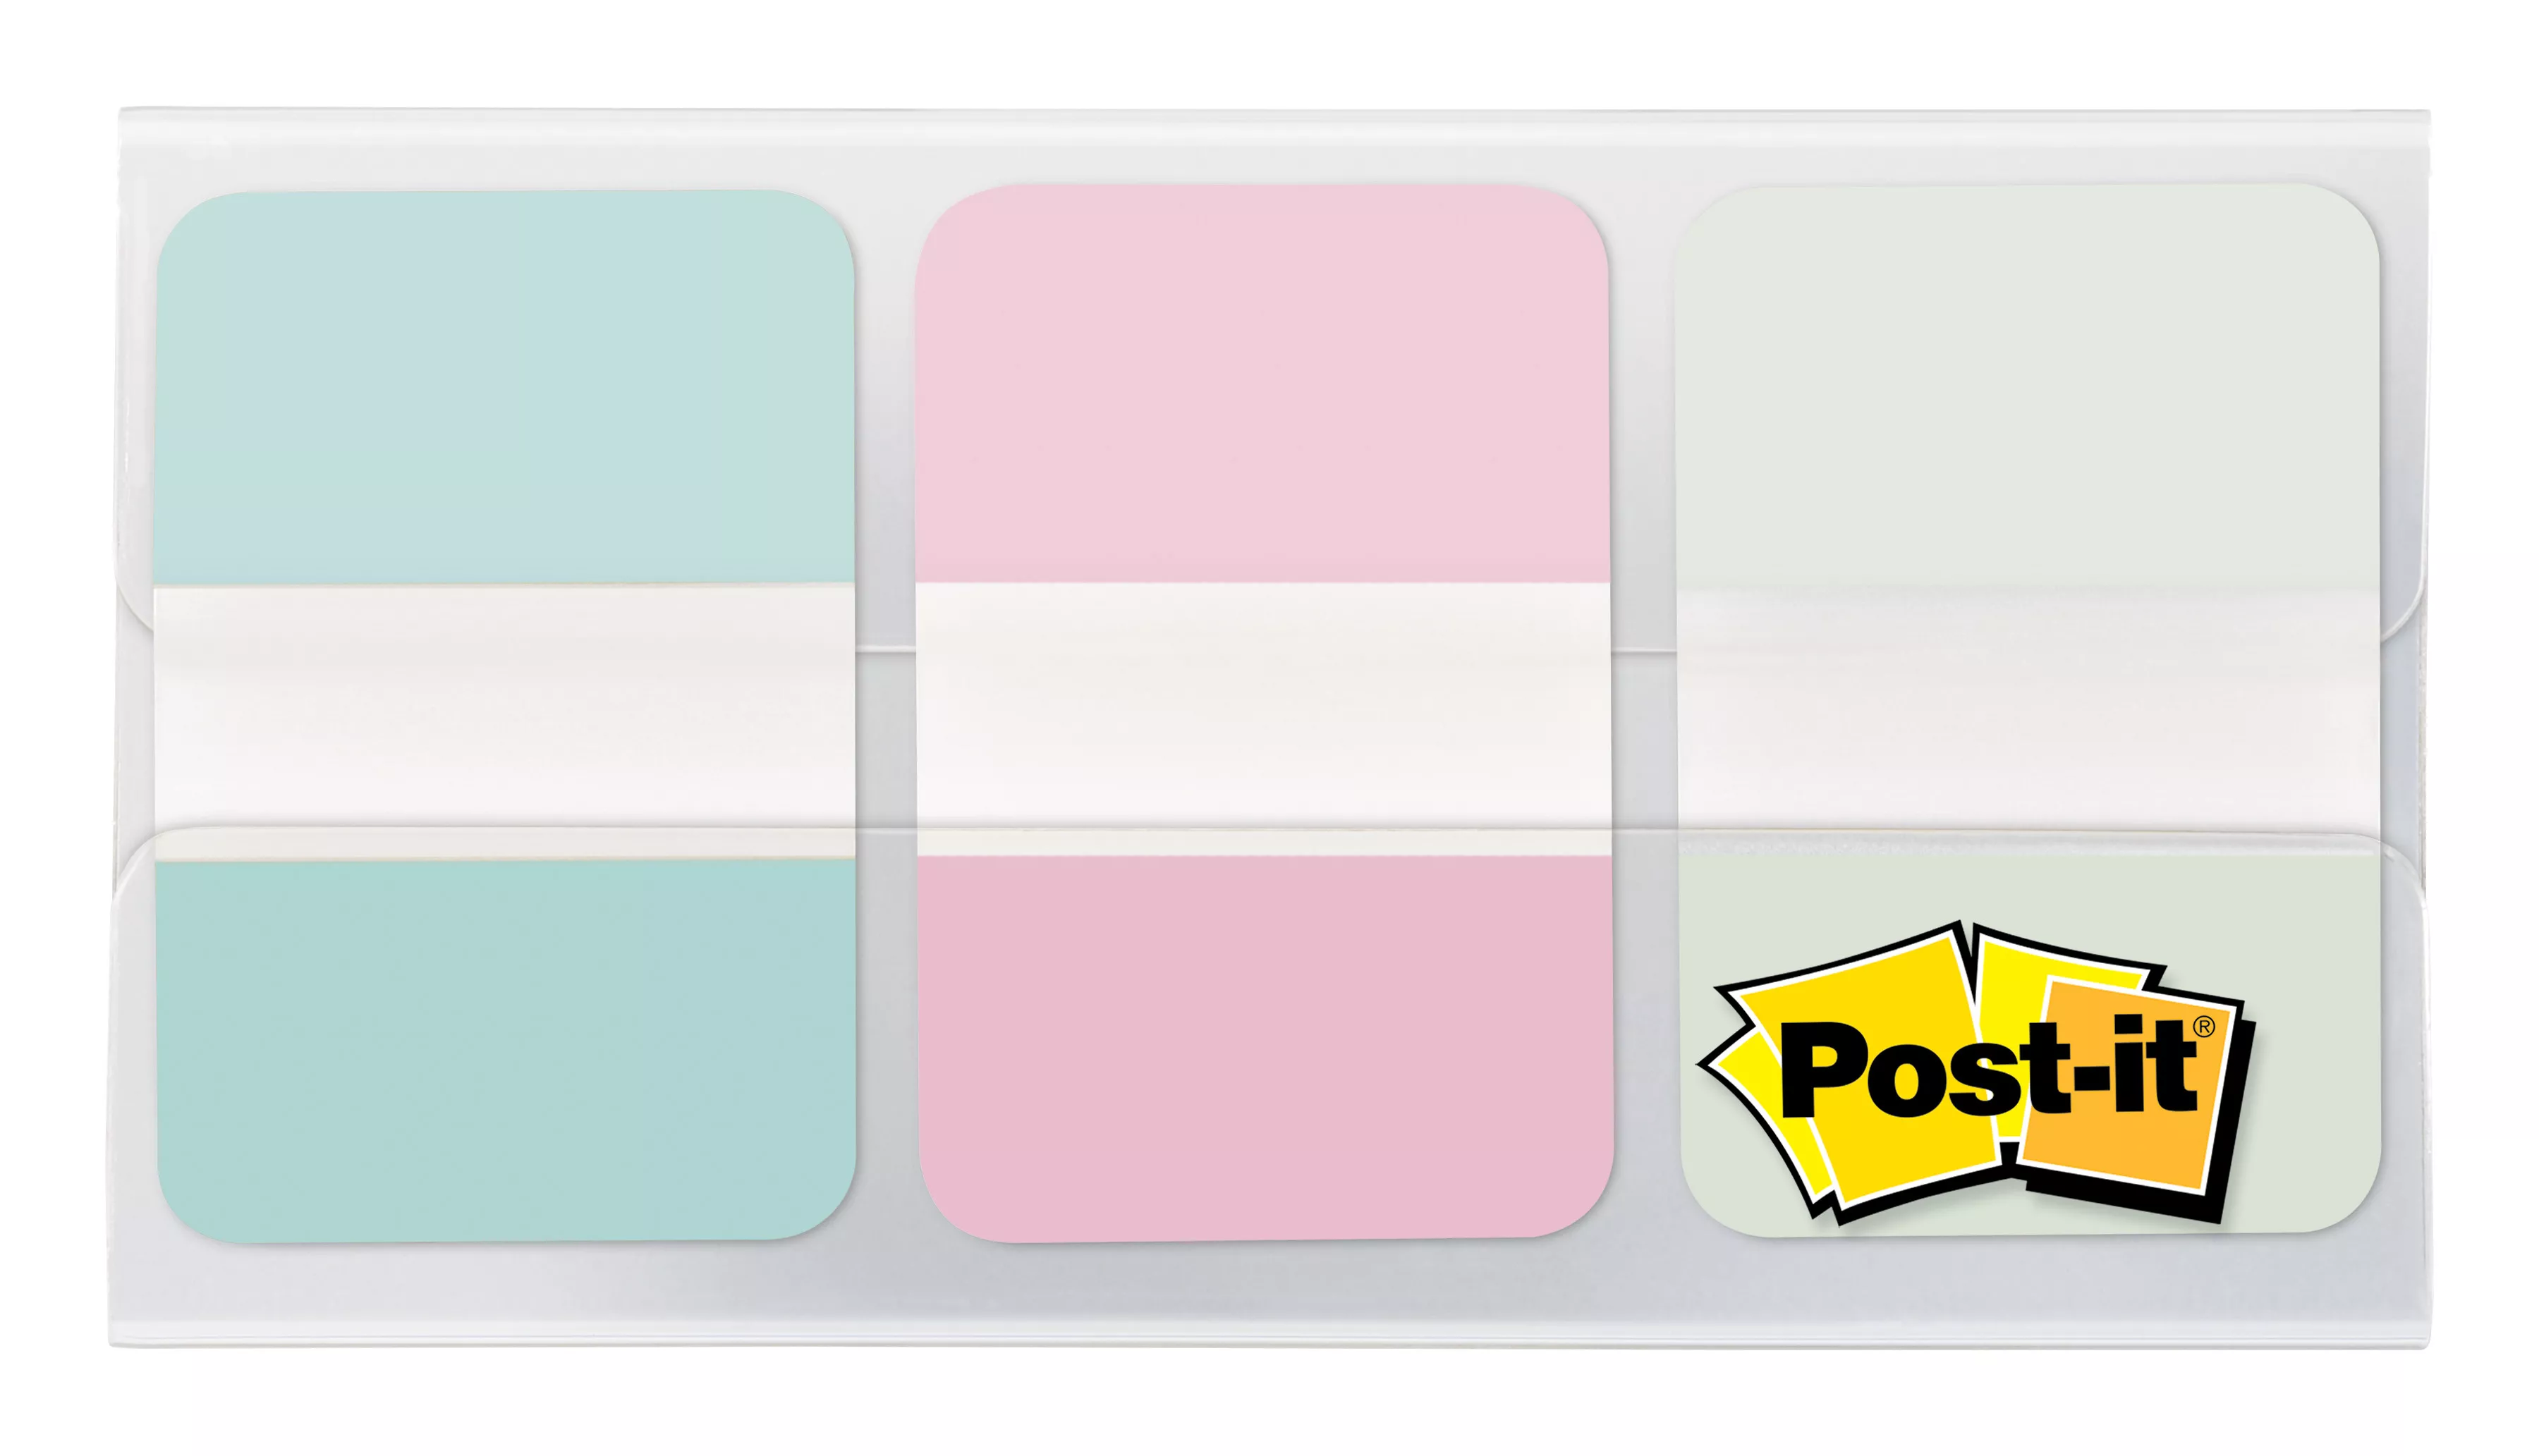 Post-it® Durable Tabs, Gradient, 1 in. x 1.5 in. (25.4 mm x 38.1 mm),
36/pack, 24/case